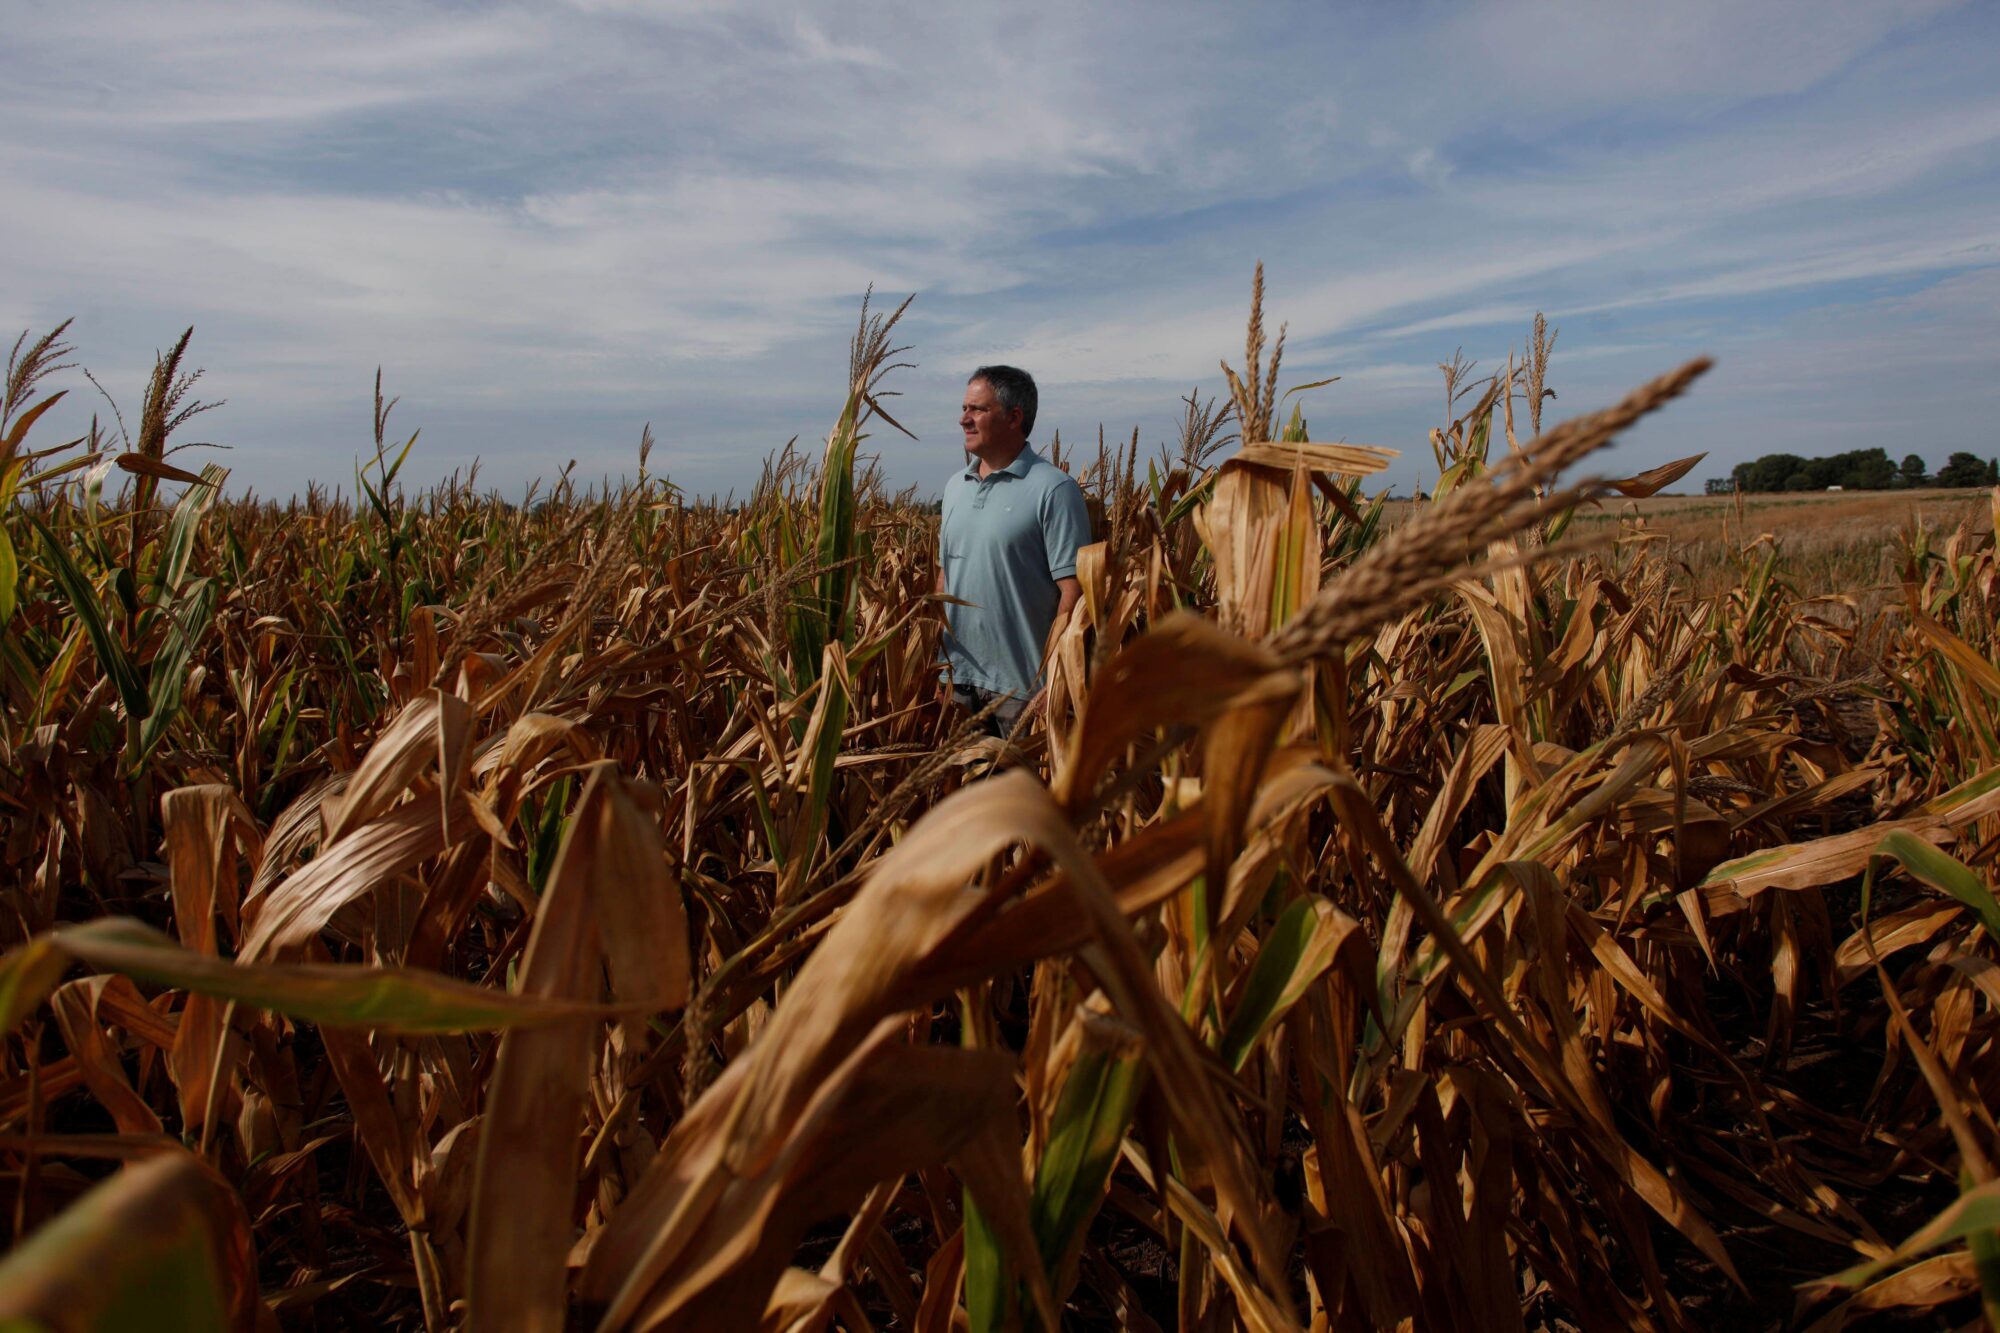 <p>A farmer stands in a drought-hit corn field near Chivilcoy, Argentina. Drought has been a recurring threat in the country’s agricultural regions, but a third successive year of the La Niña weather pattern has intensified challenges to farmers (Image: Martin Acosta / Alamy)</p>